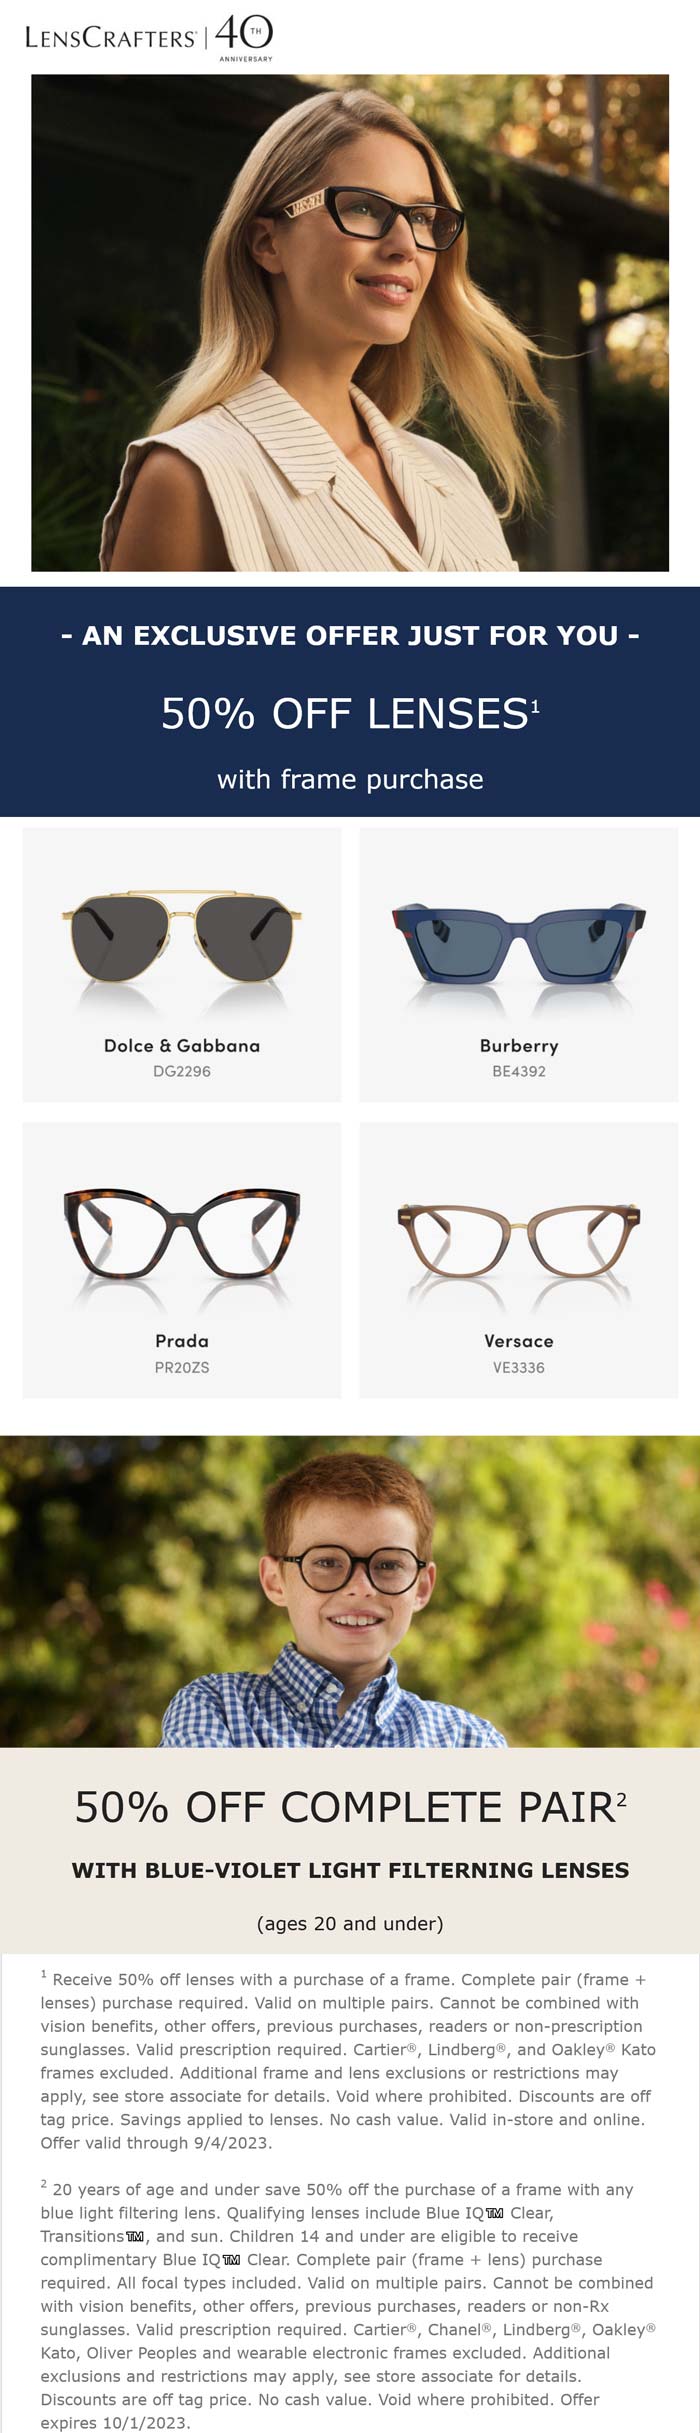 Lenscrafters stores Coupon  50% off at Lenscrafters, ditto online #lenscrafters 